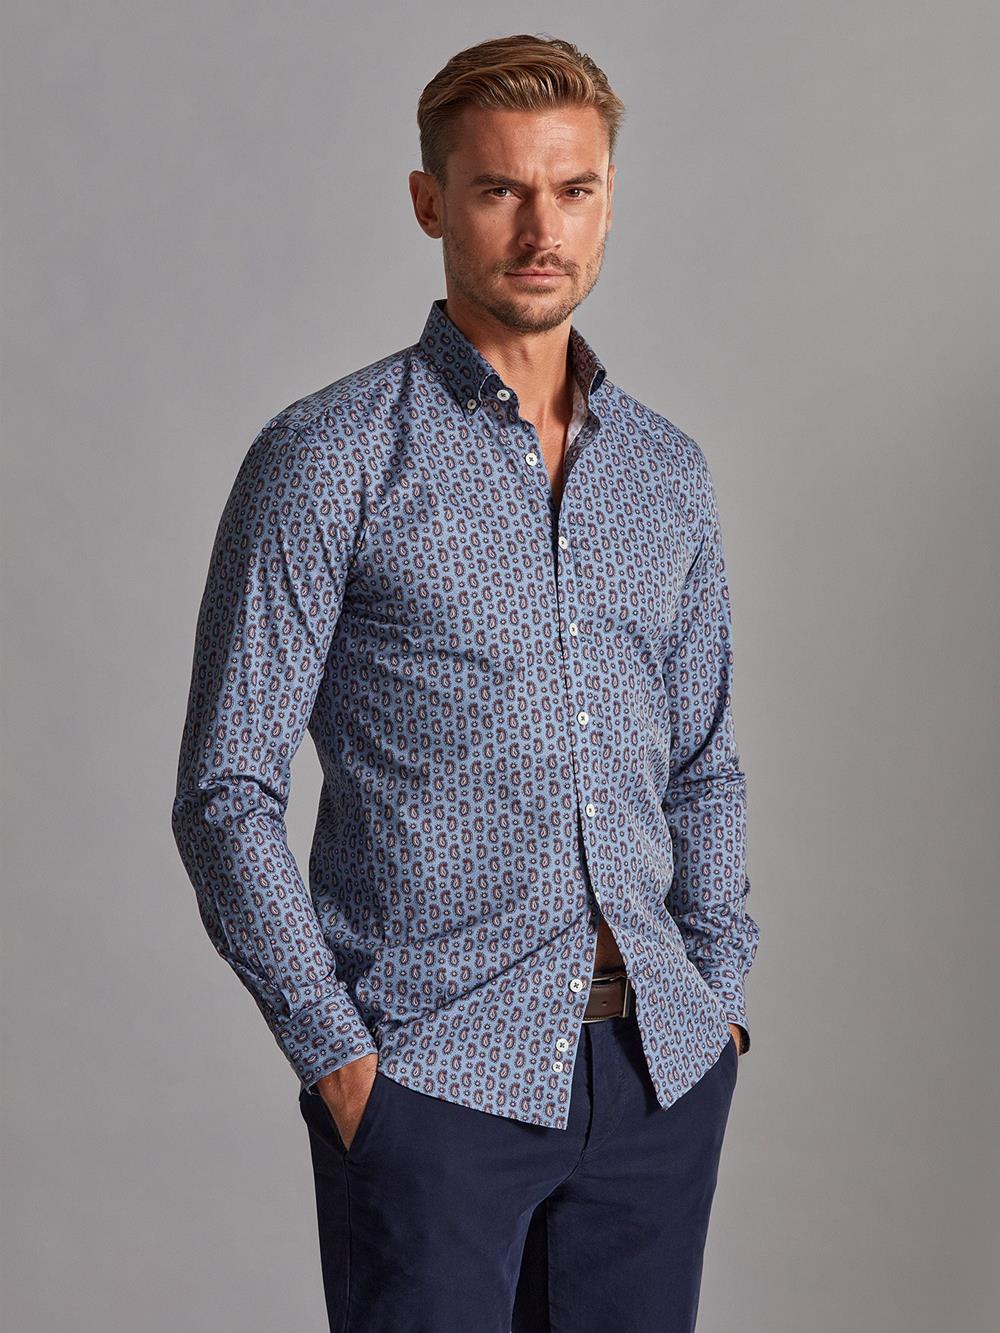 Chase Slim Fit Shirt - Buttoned collar